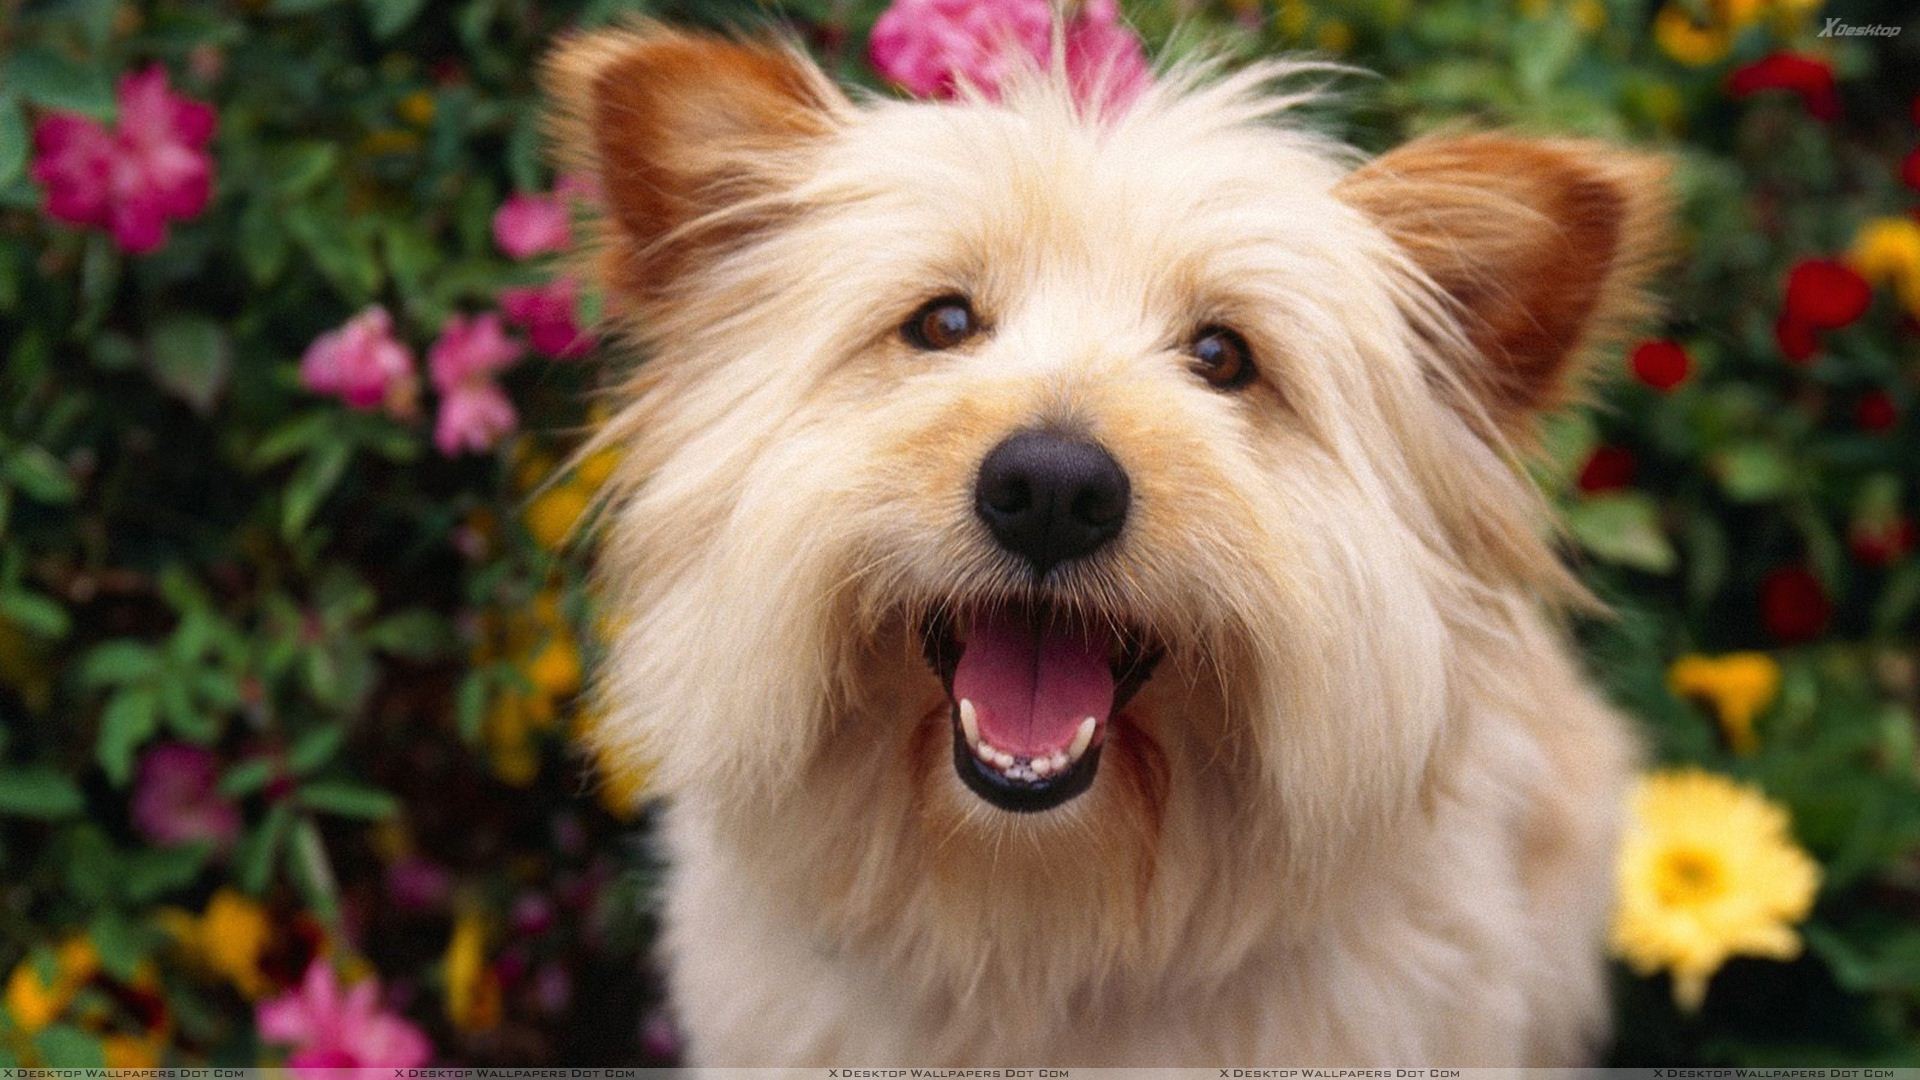 1920x1080 You are viewing wallpaper titled "Terrier Cute White Dog" ...